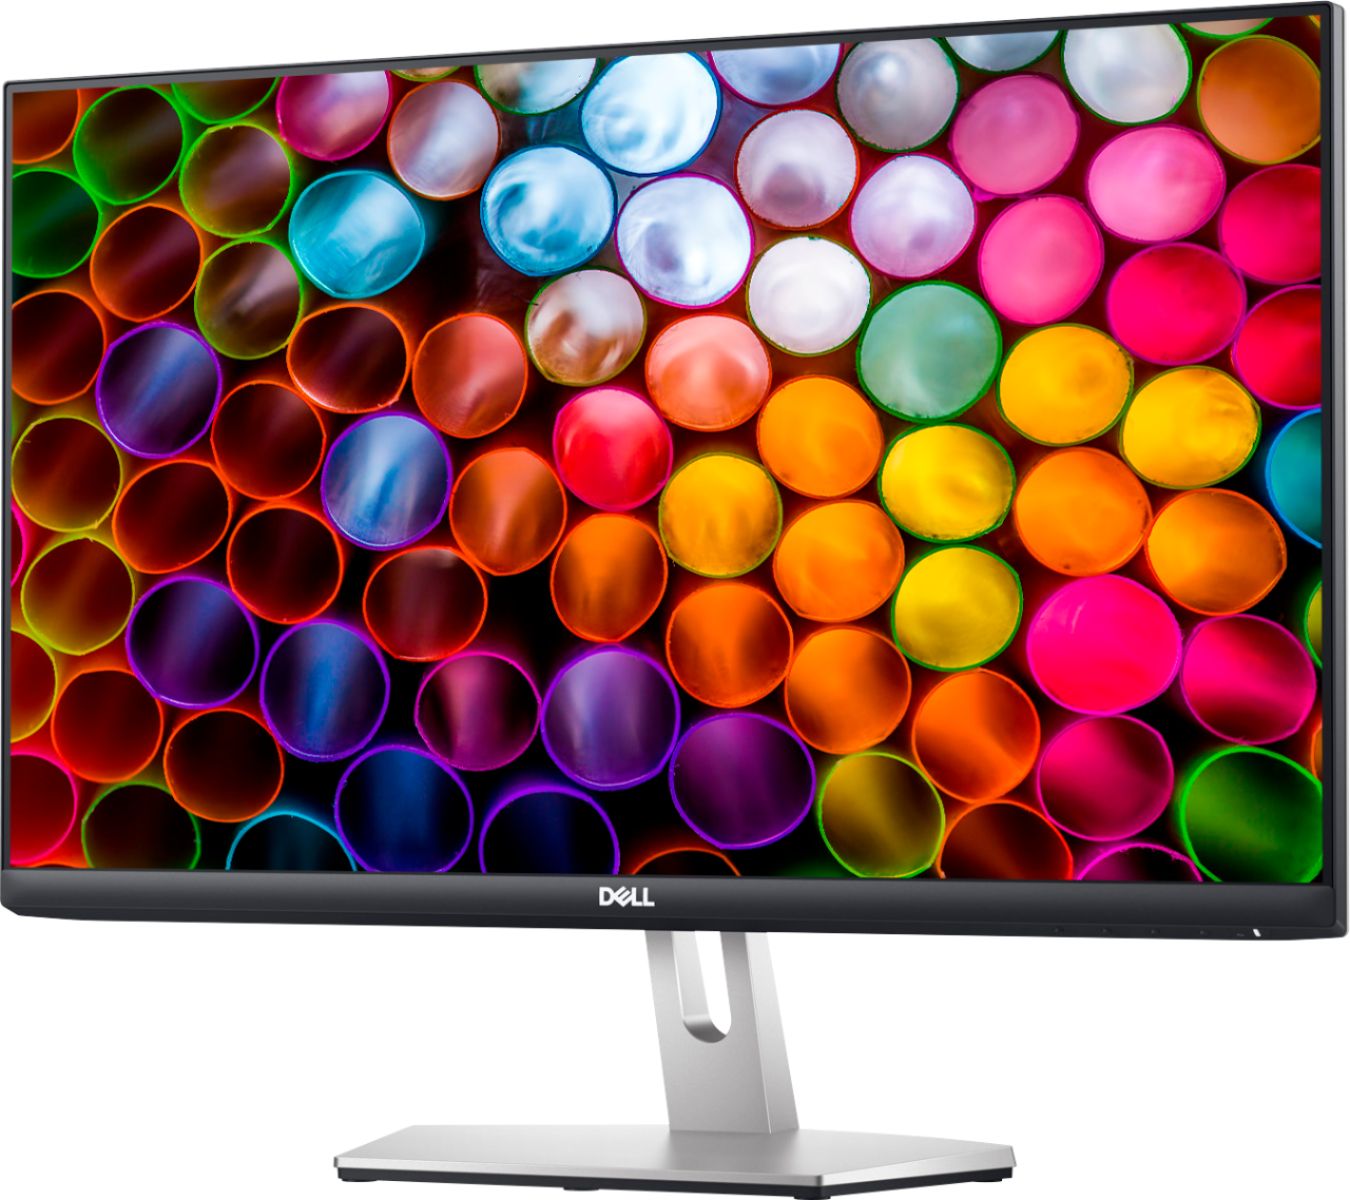 Angle View: Dell - Geek Squad Certified Refurbished 23.8" IPS LED FHD FreeSync Monitor - Silver